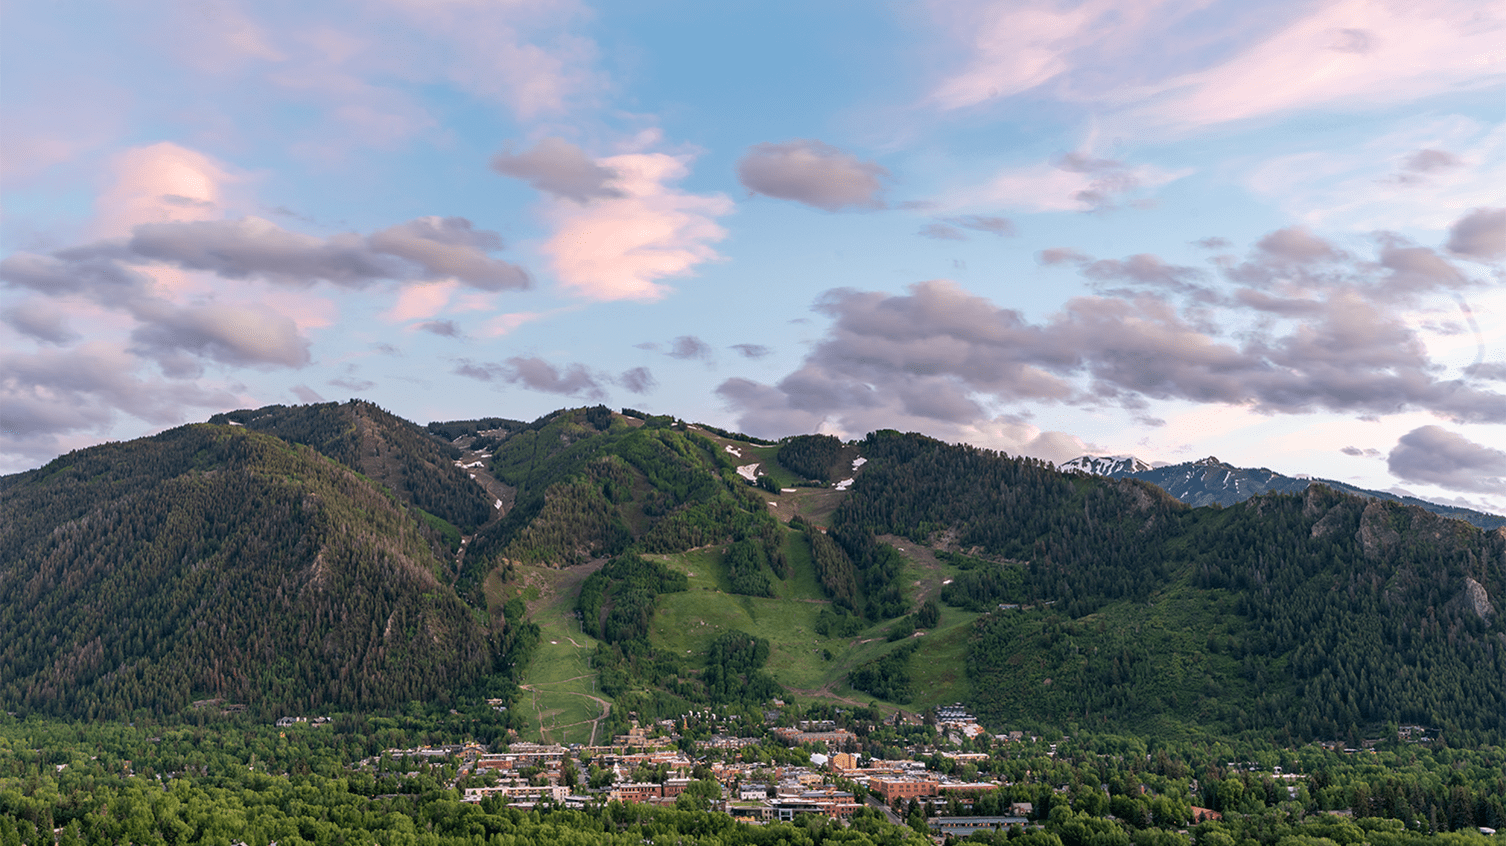 Aspen Mountain at Sunset, illuminated by the setting sun, town of Aspen is settled below the mountain